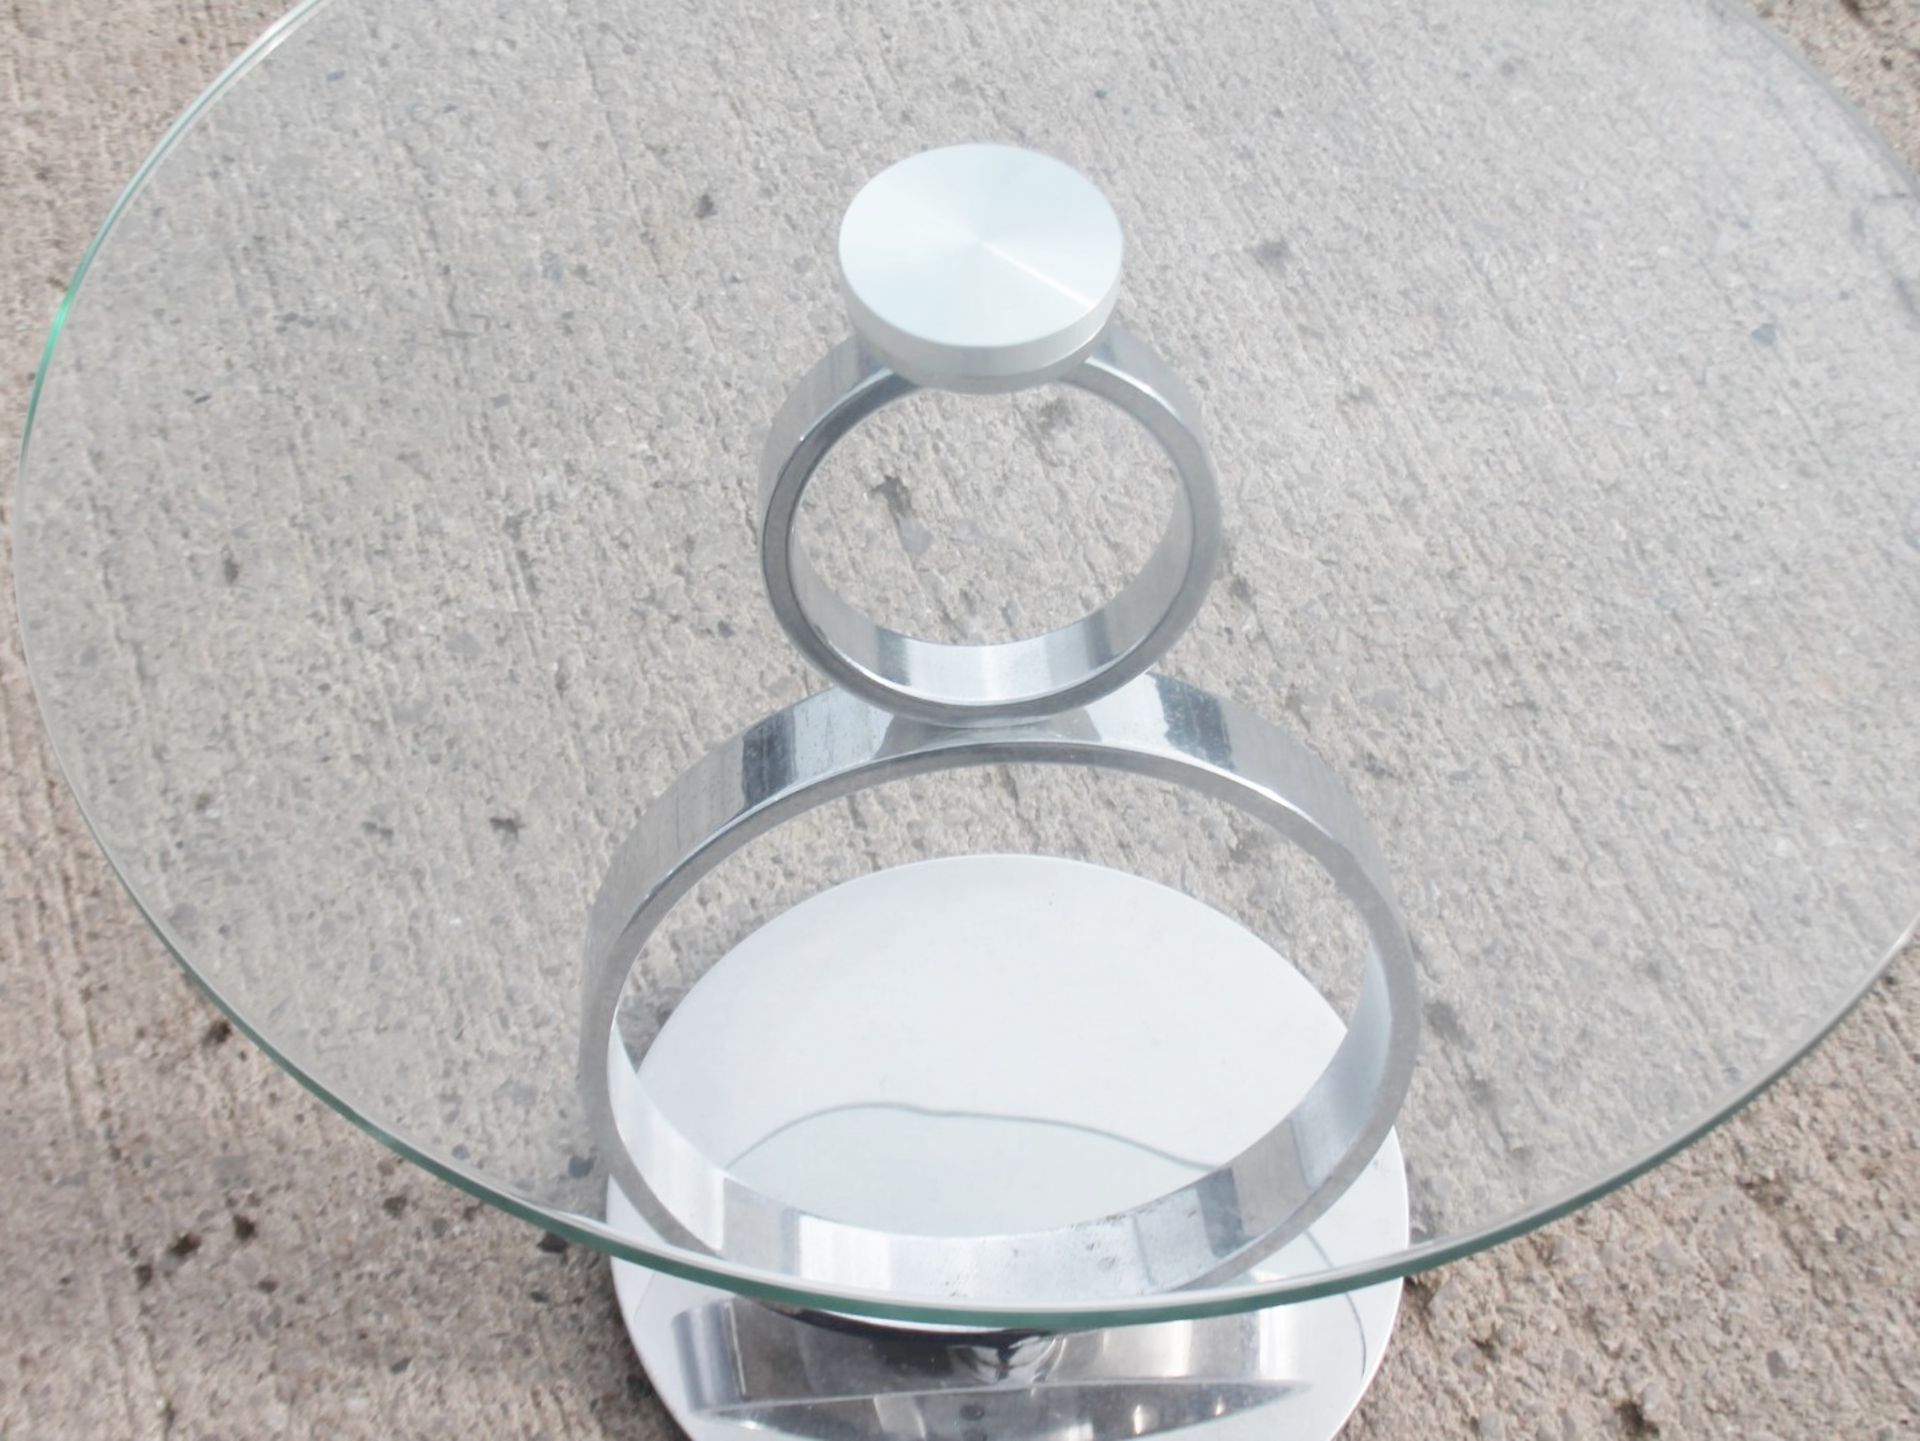 1 x Small Circular Glass / Chrome Table With A Slanted Base - Recently Relocated From An Exclusive - Image 4 of 5